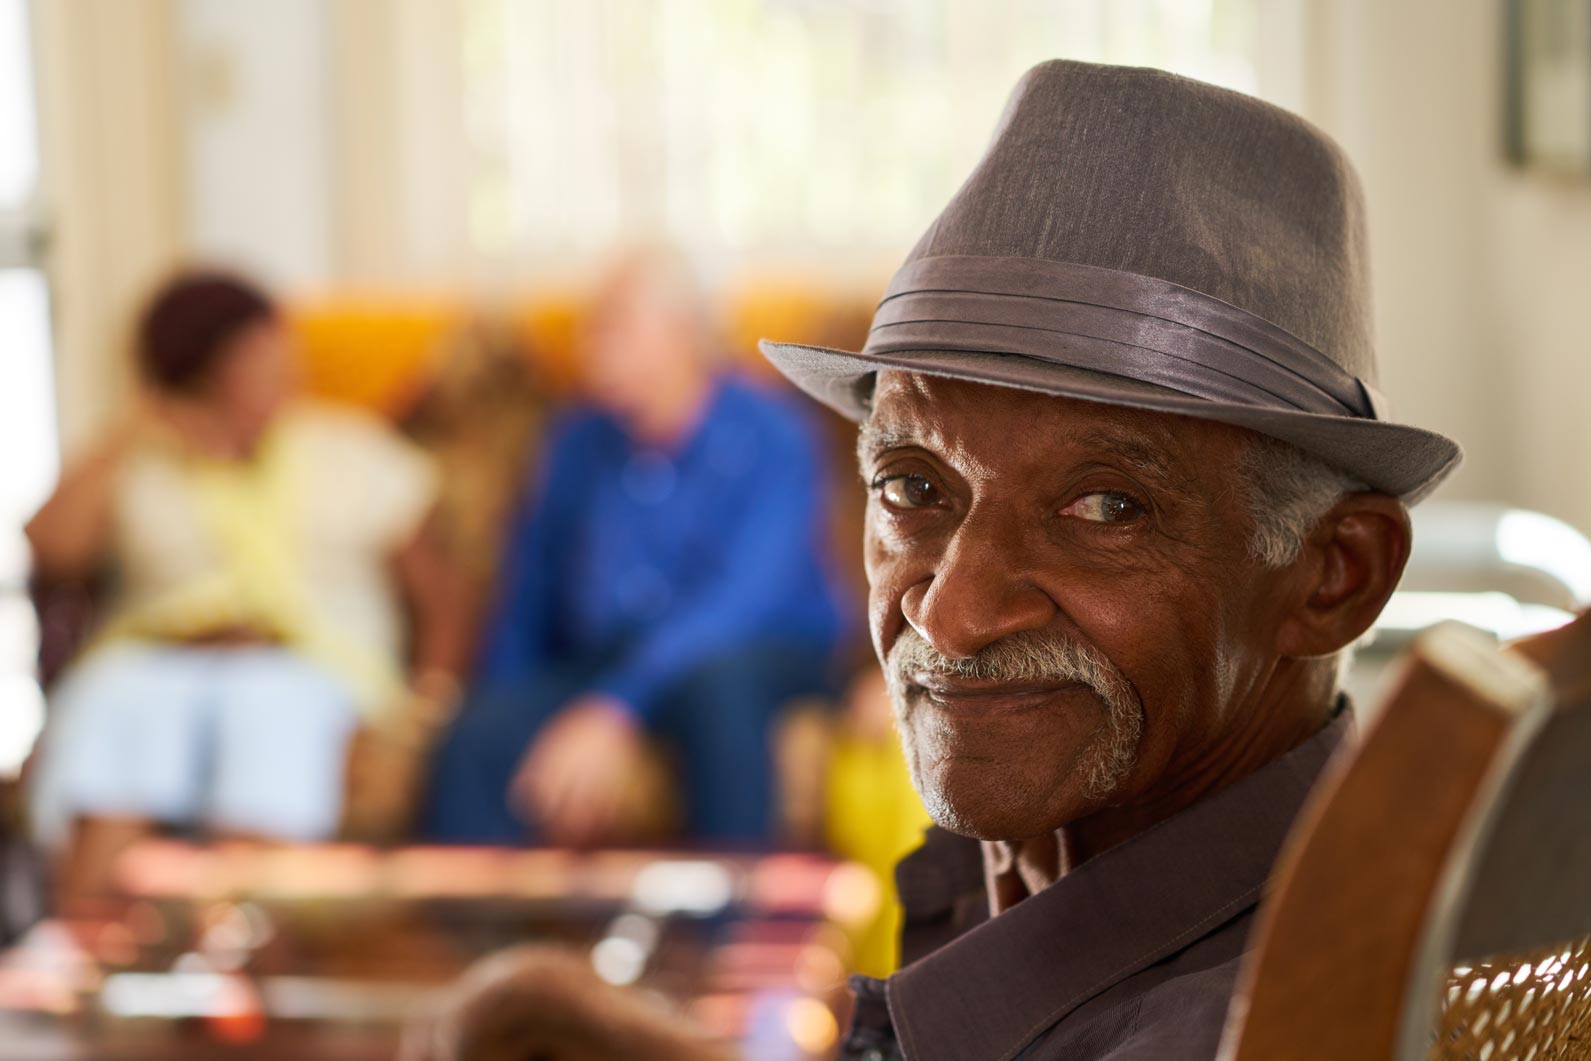 Old man in hat, who looks similar to an older Sammy Davis Jr., looking right at you.